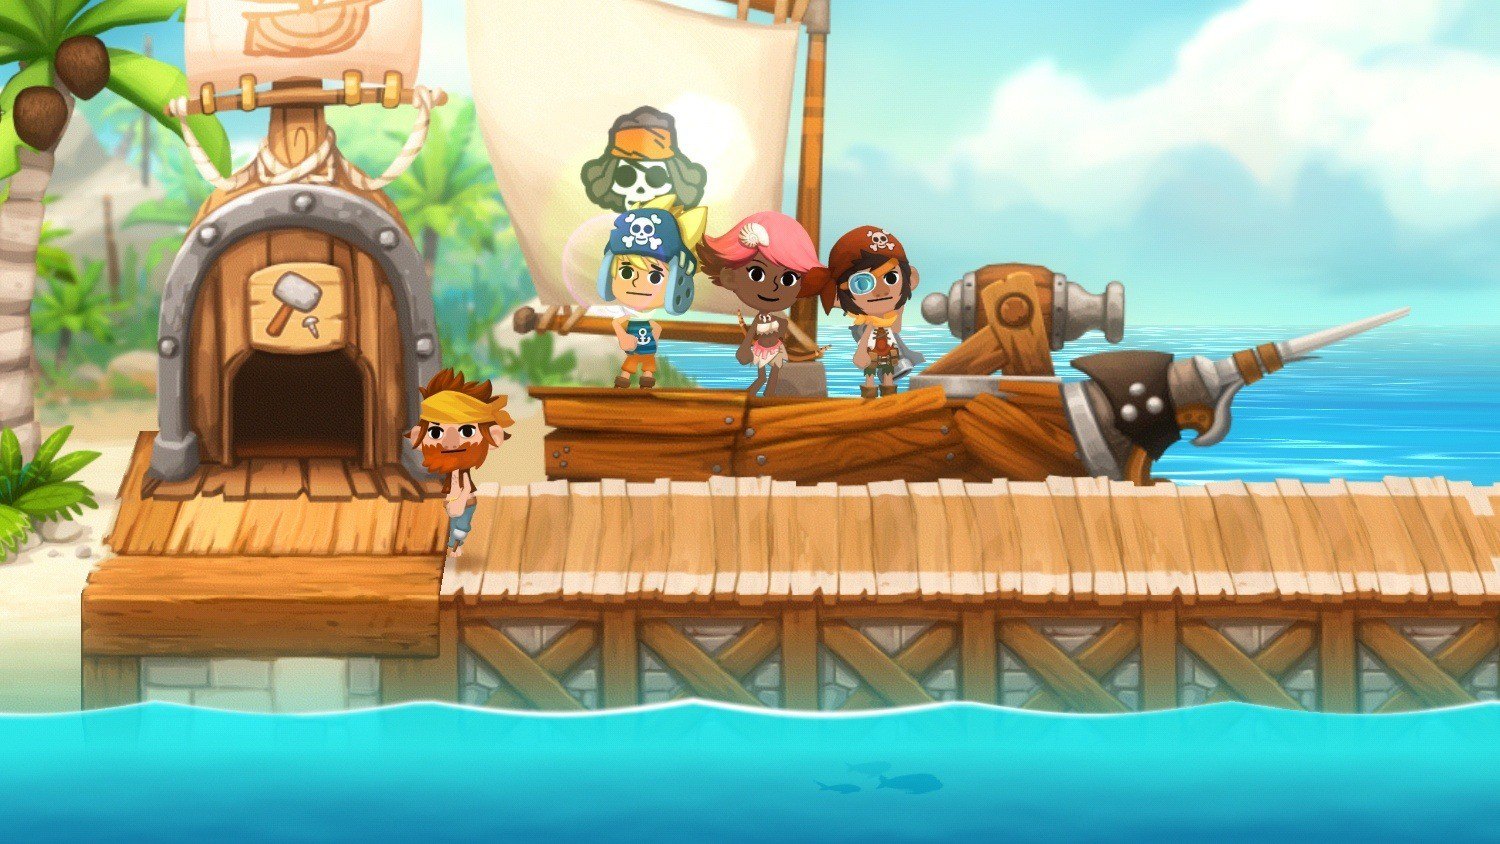 Pirate Power Review: Thar’ She Blows!